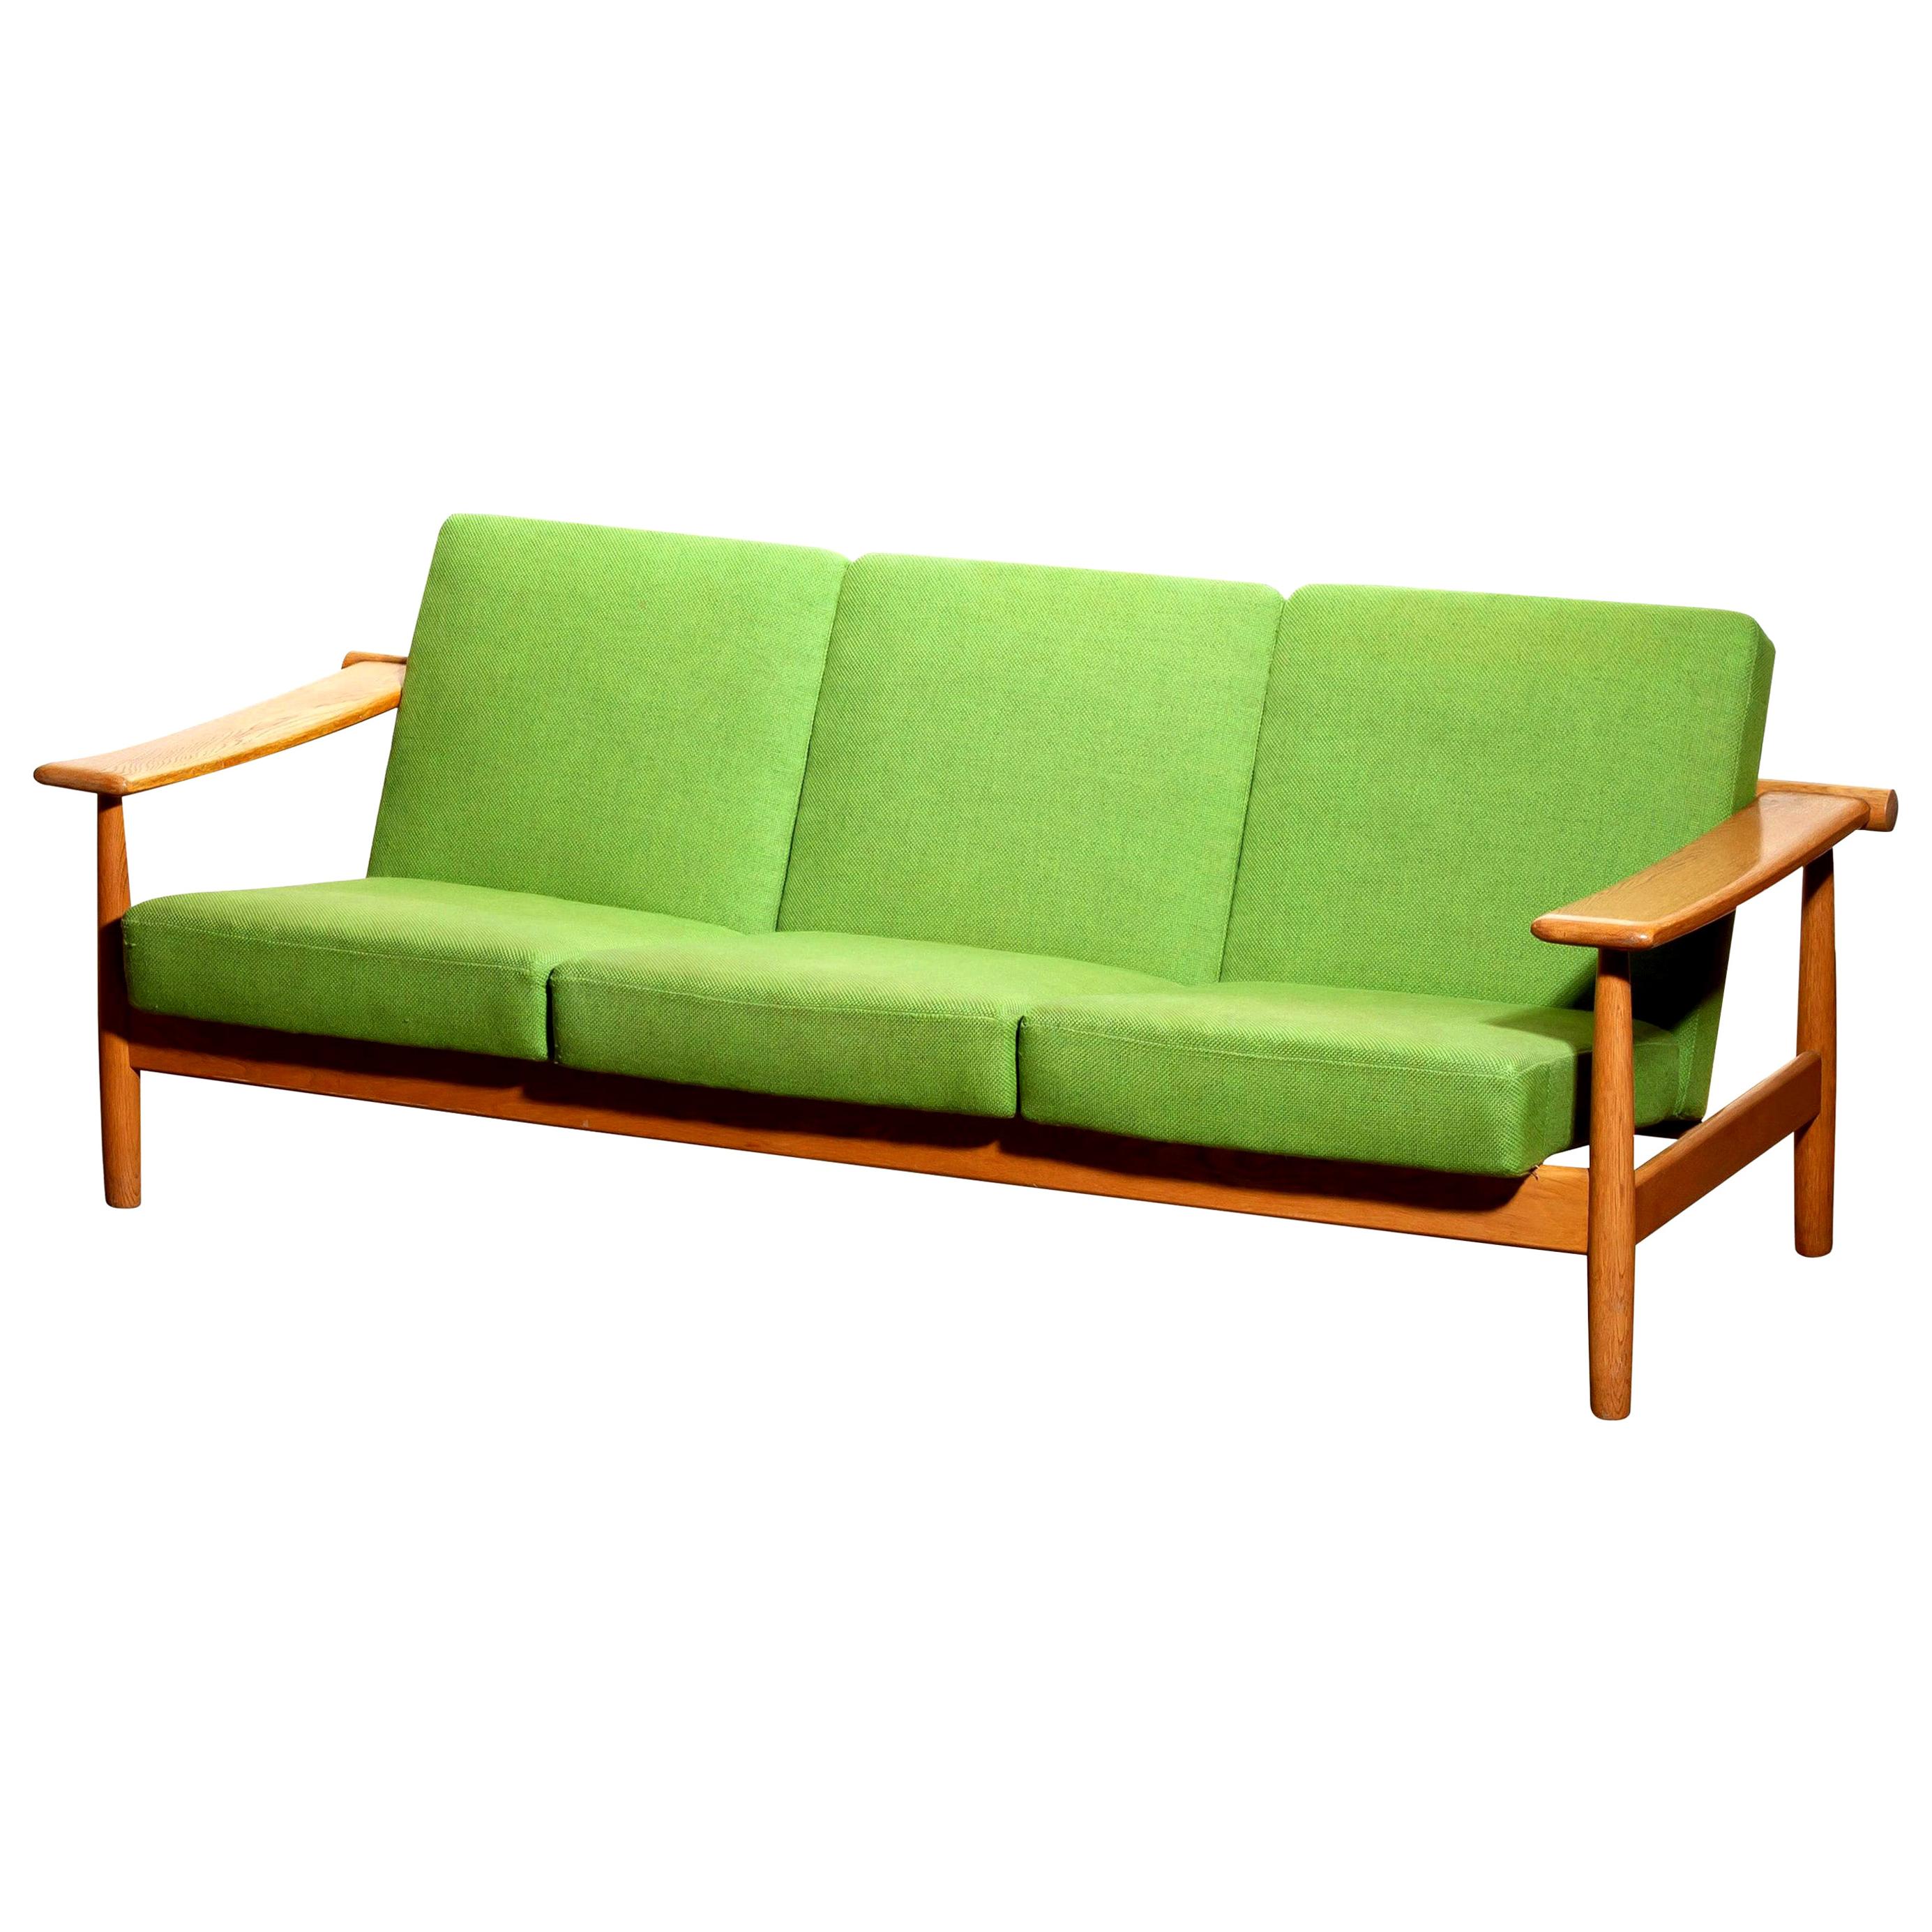 Beautiful oak sofa from the 1960s made in Denmark.
The oak frame is in good condition.
The green fabric is in fair condition like the pictures shows.




 